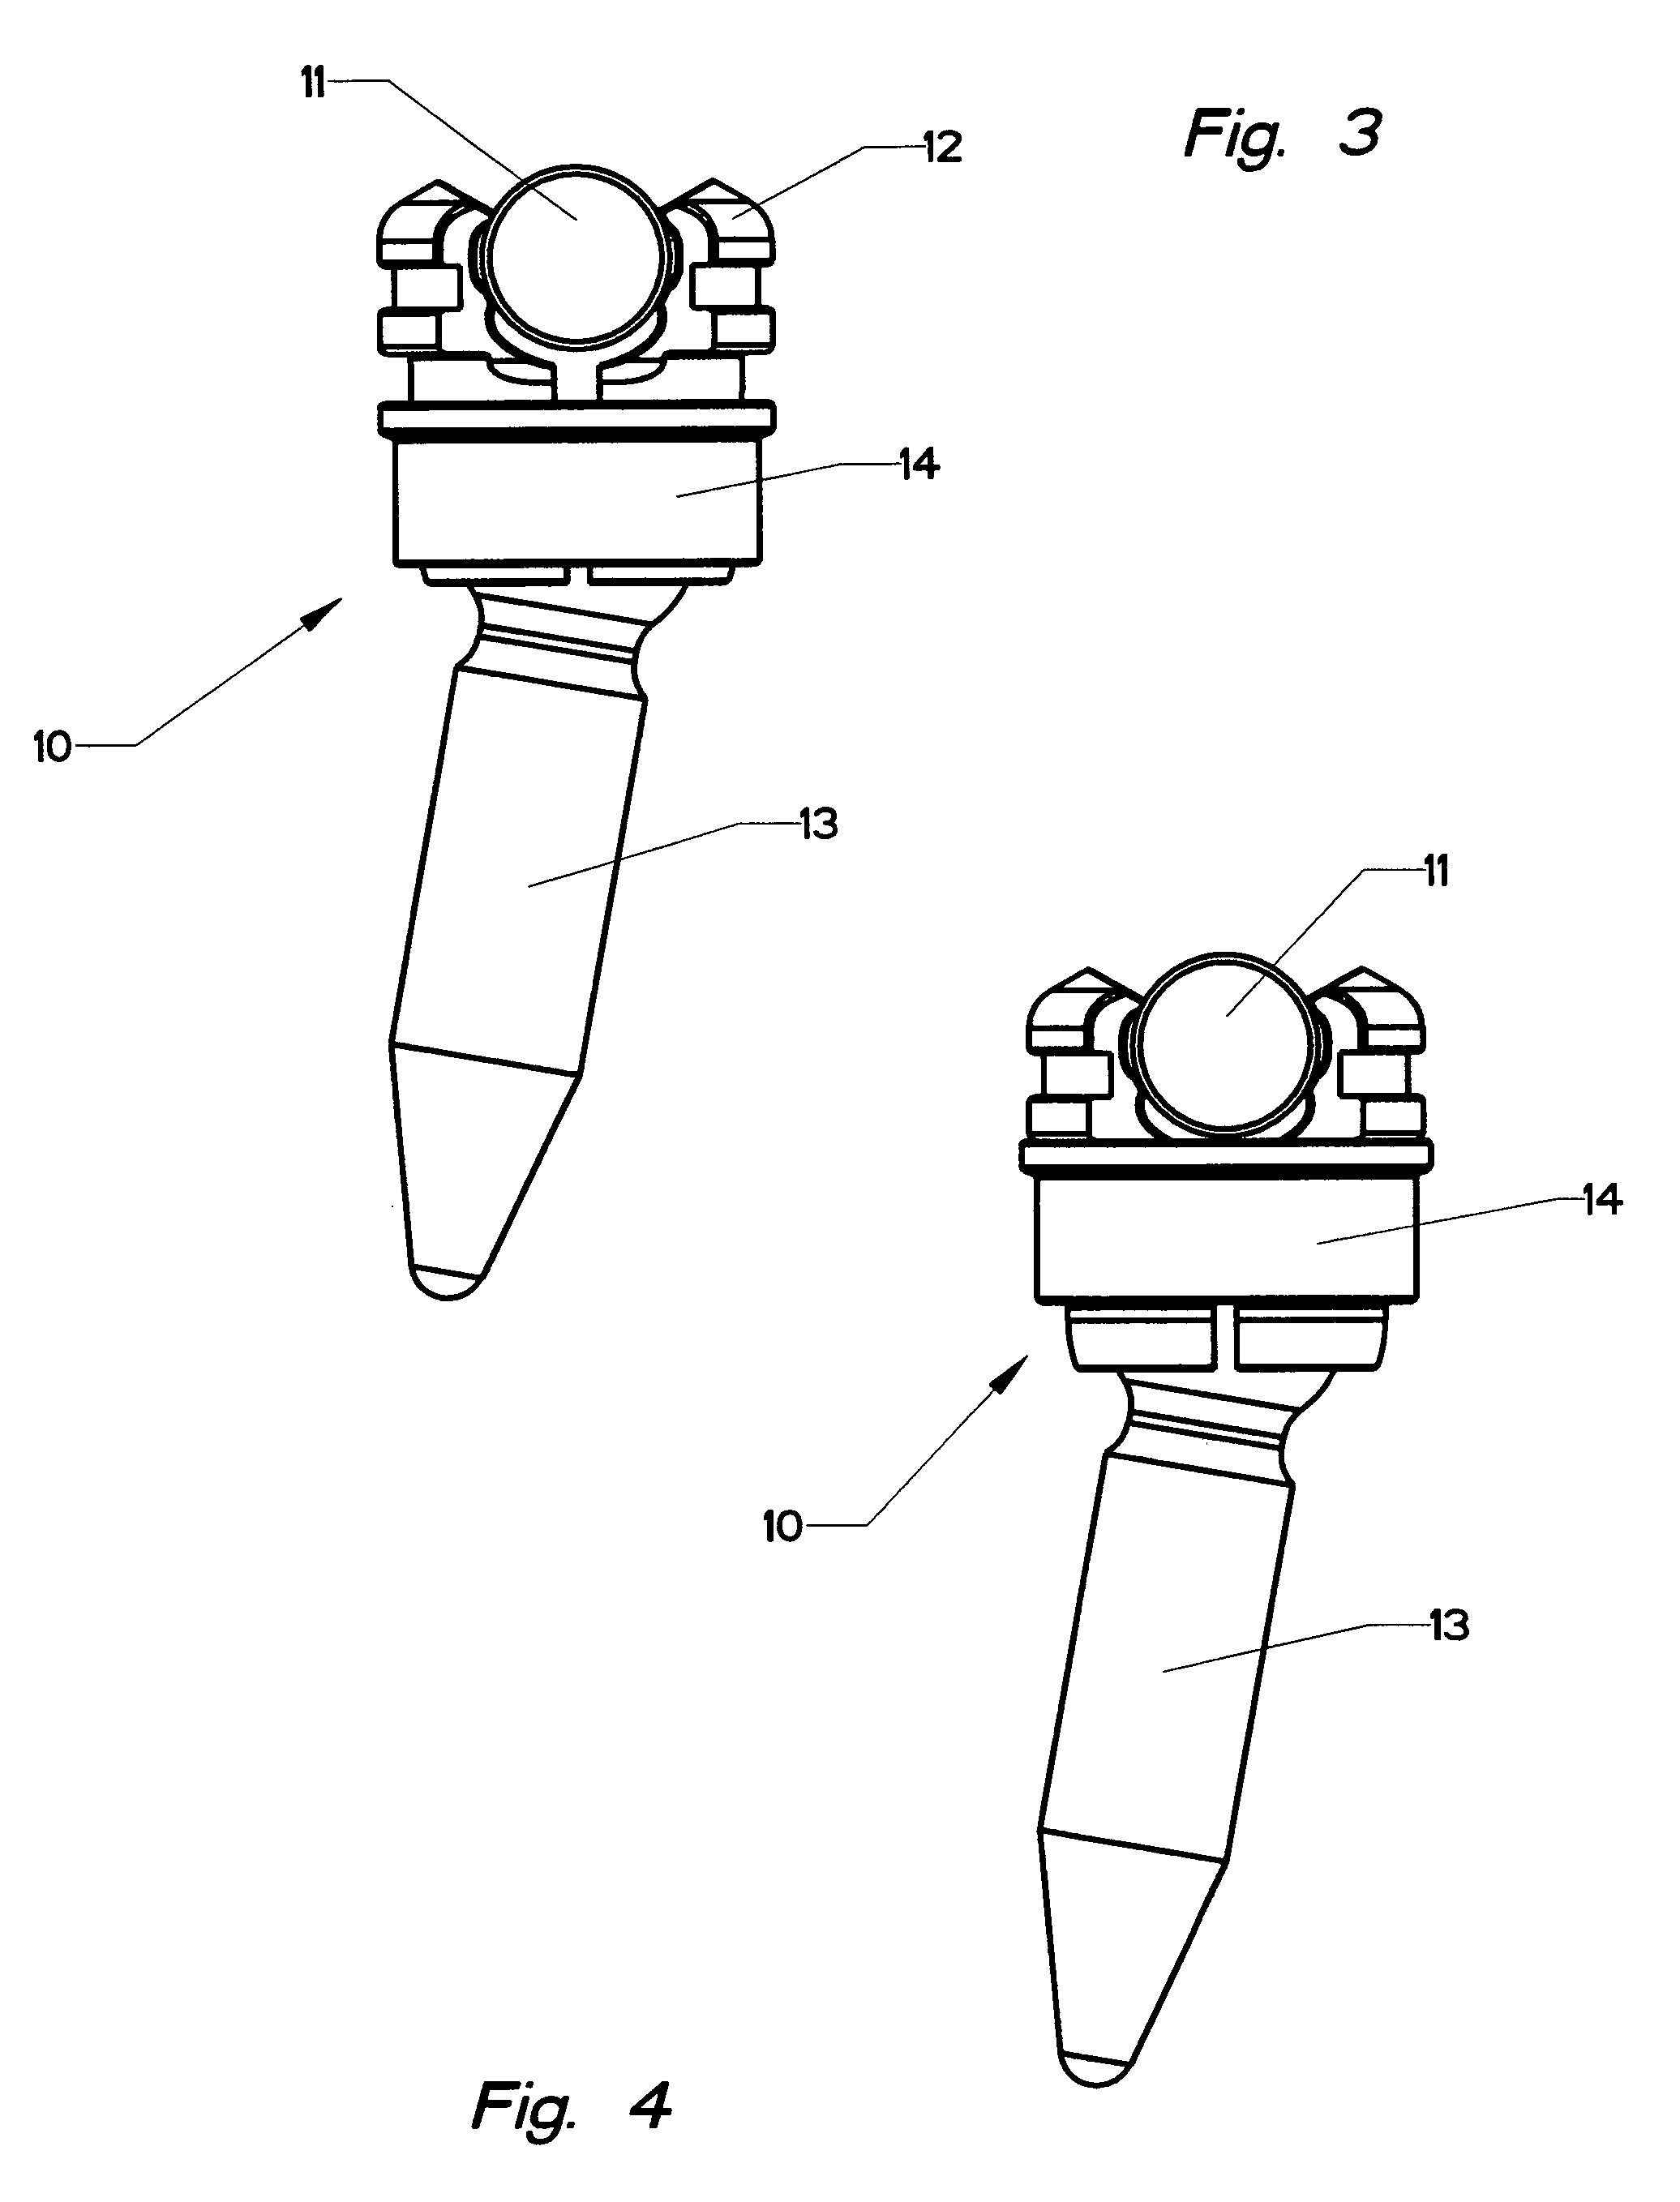 Bone fixation system with low profile fastener